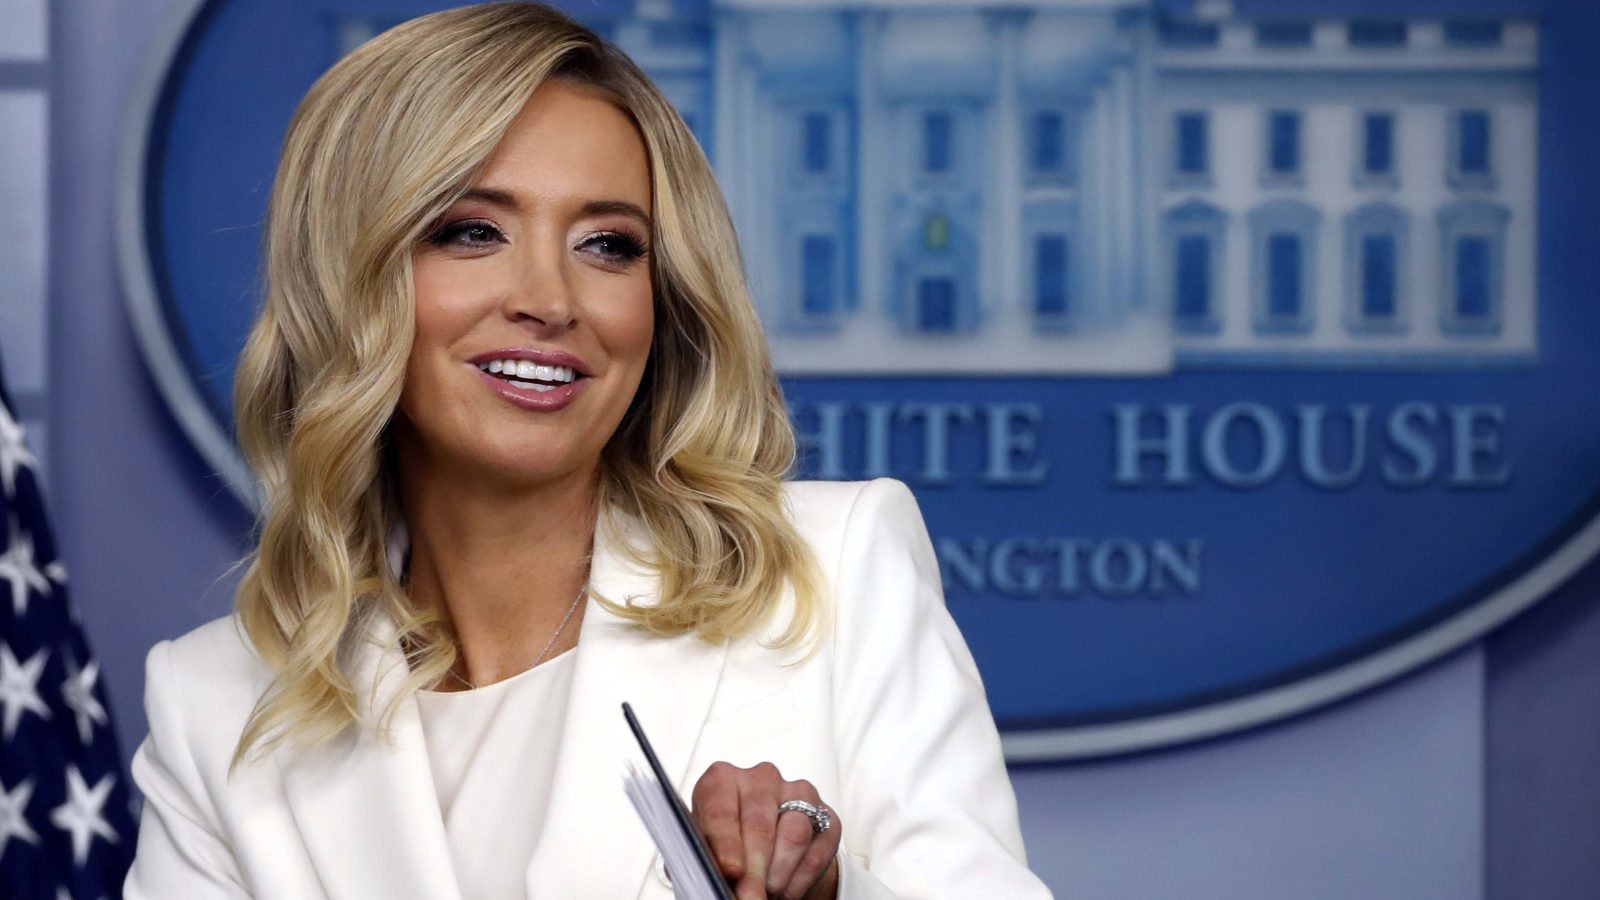 "The Remarkable Journey of Kayleigh McEnany: From Political Expert to White House Press Secretary"